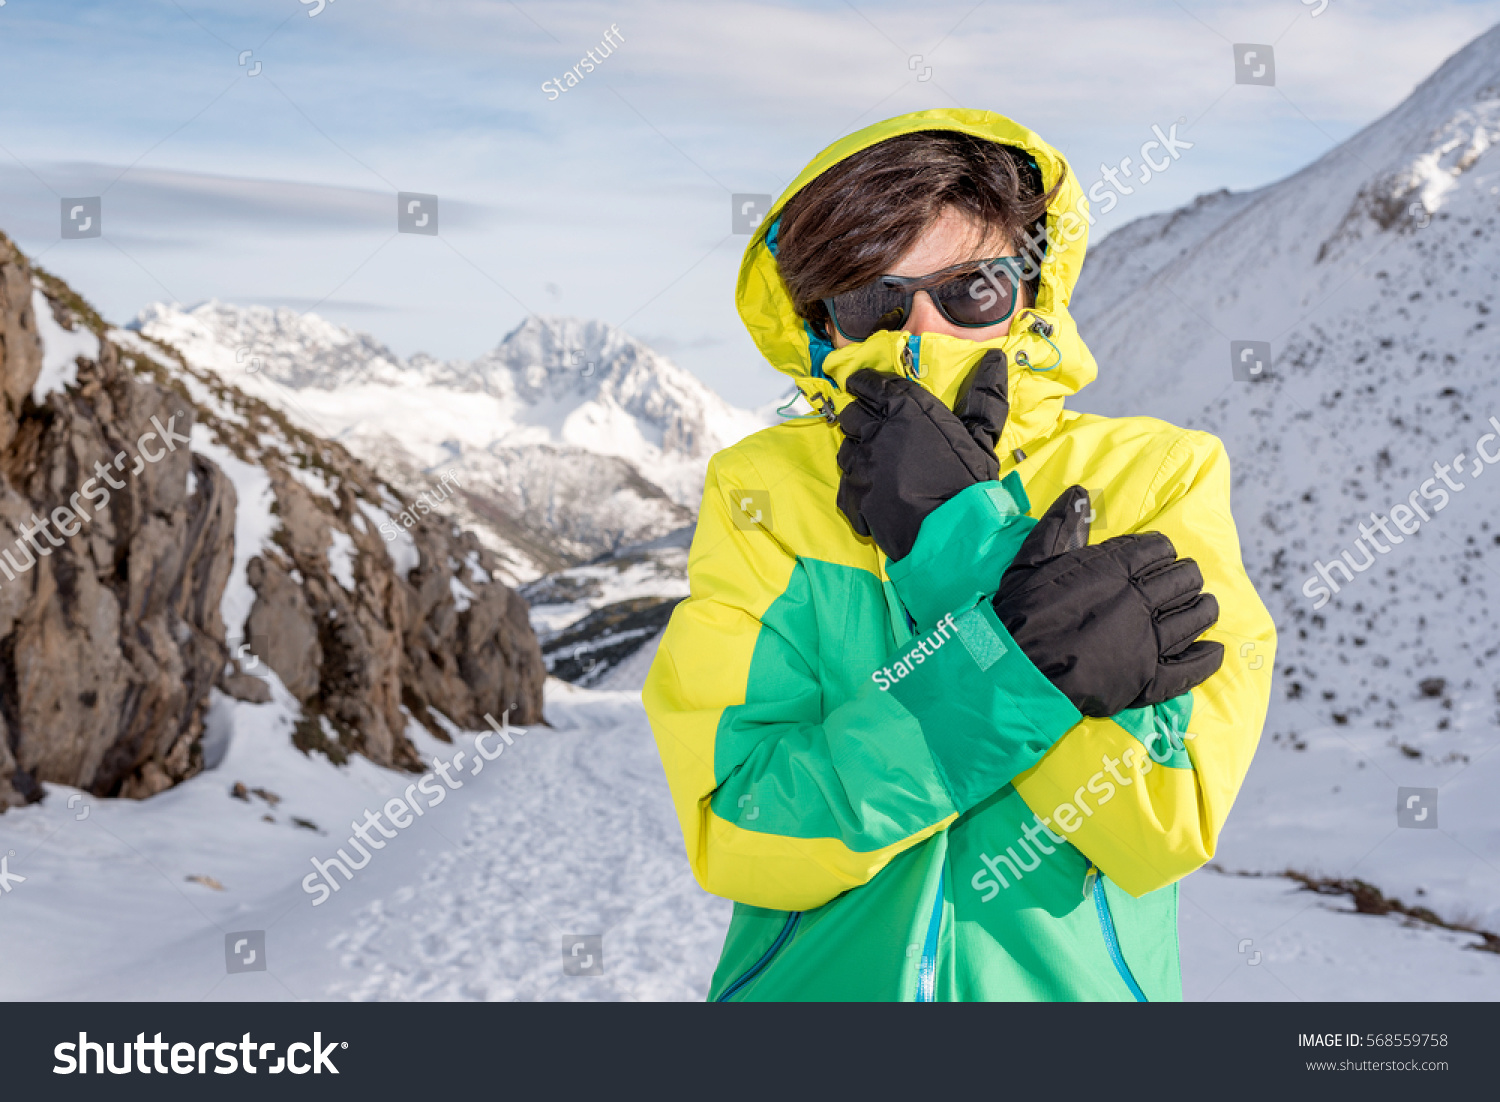 Woman feeling cold discomfort covering her mouth and face from the wind wearing gloves, hood, glasses and windstopper, at extreme snow elements environment on a snowy mountain with low temperature. #568559758